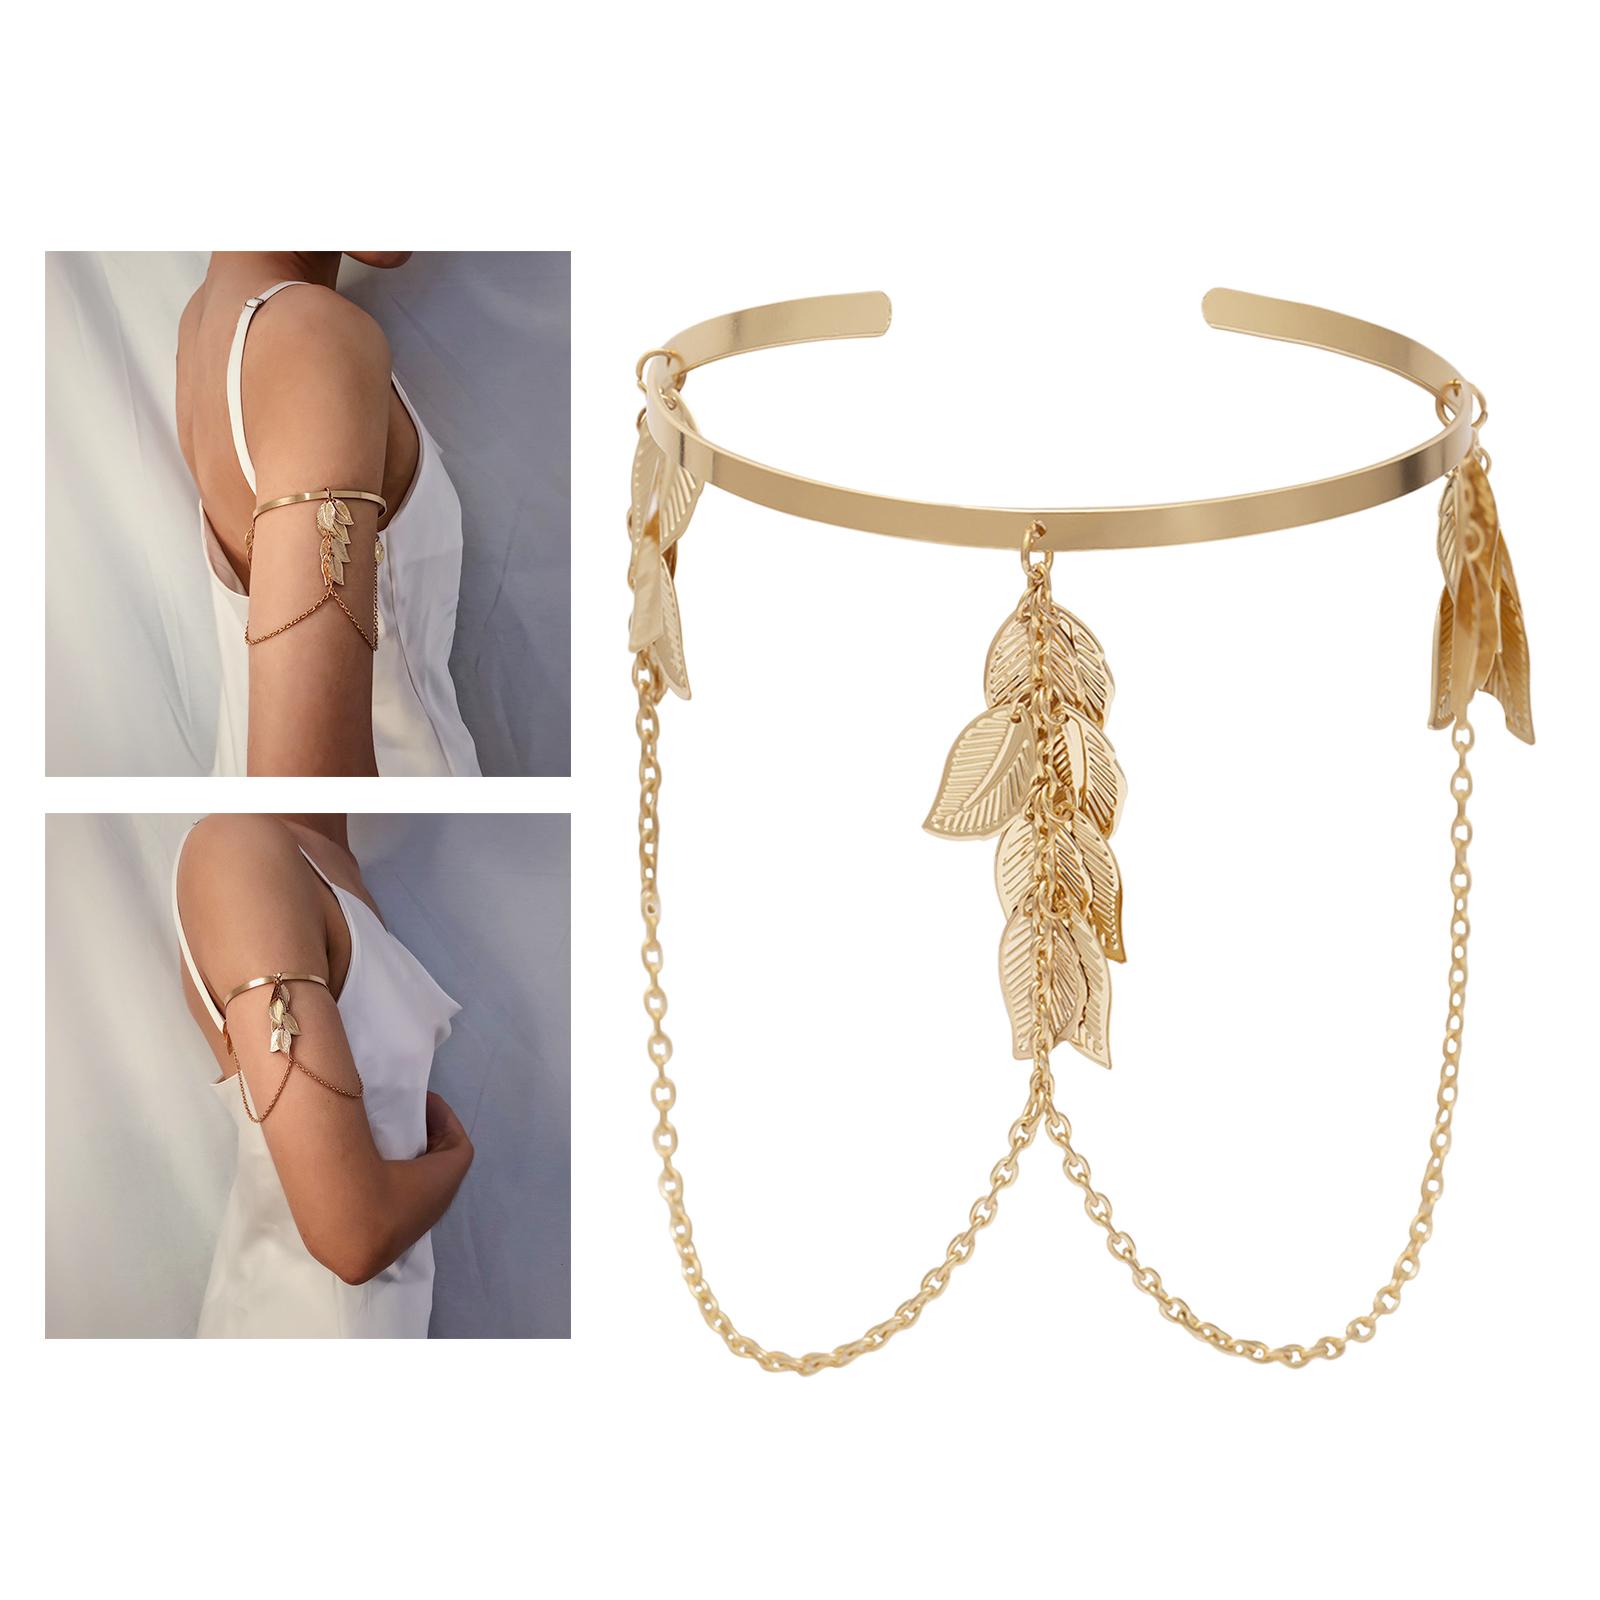 Leaf Feather Arm Bracelet Chain for Women Girls Open Upper Arm Bangle Armlet Gold